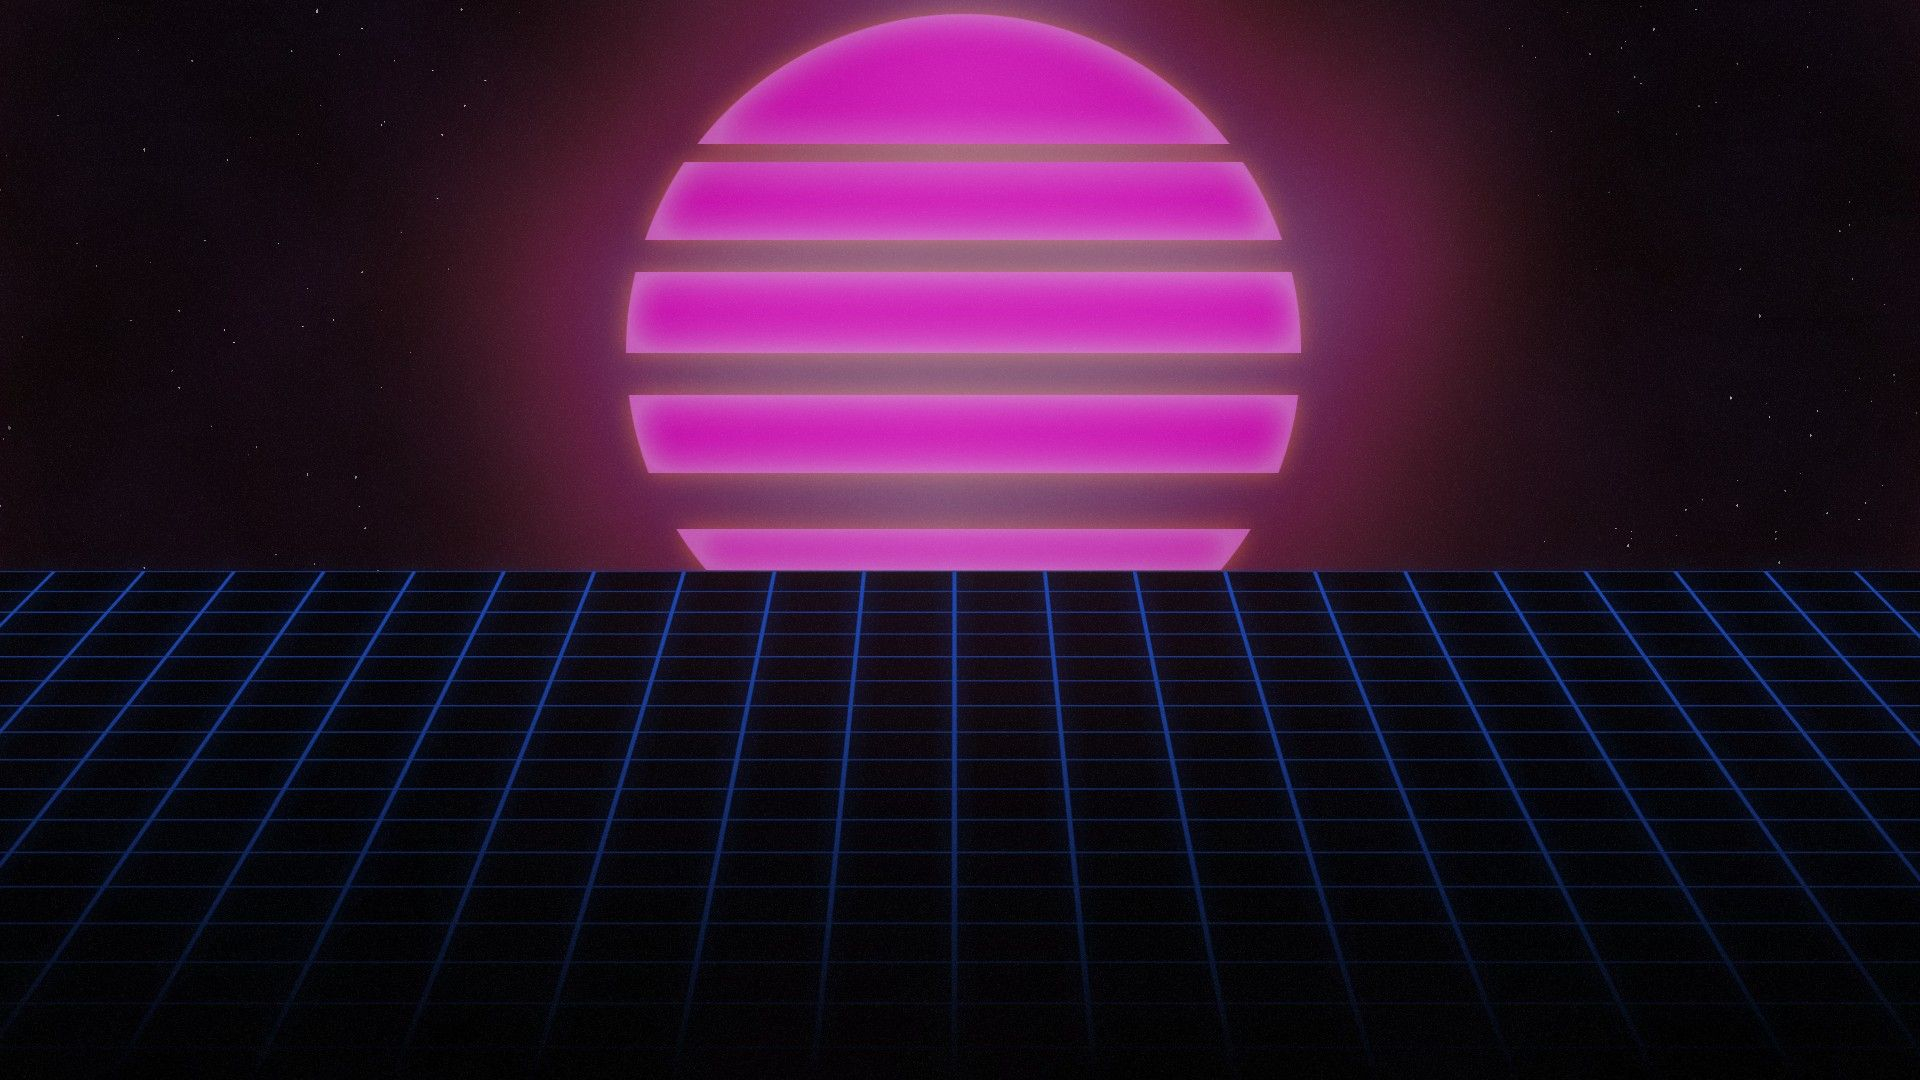 1920x1080 80s Sunset by AllieG3X on Retro 80s Wallpapers | Neon wallpaper, Wallpaper, Minimalist wallpaper